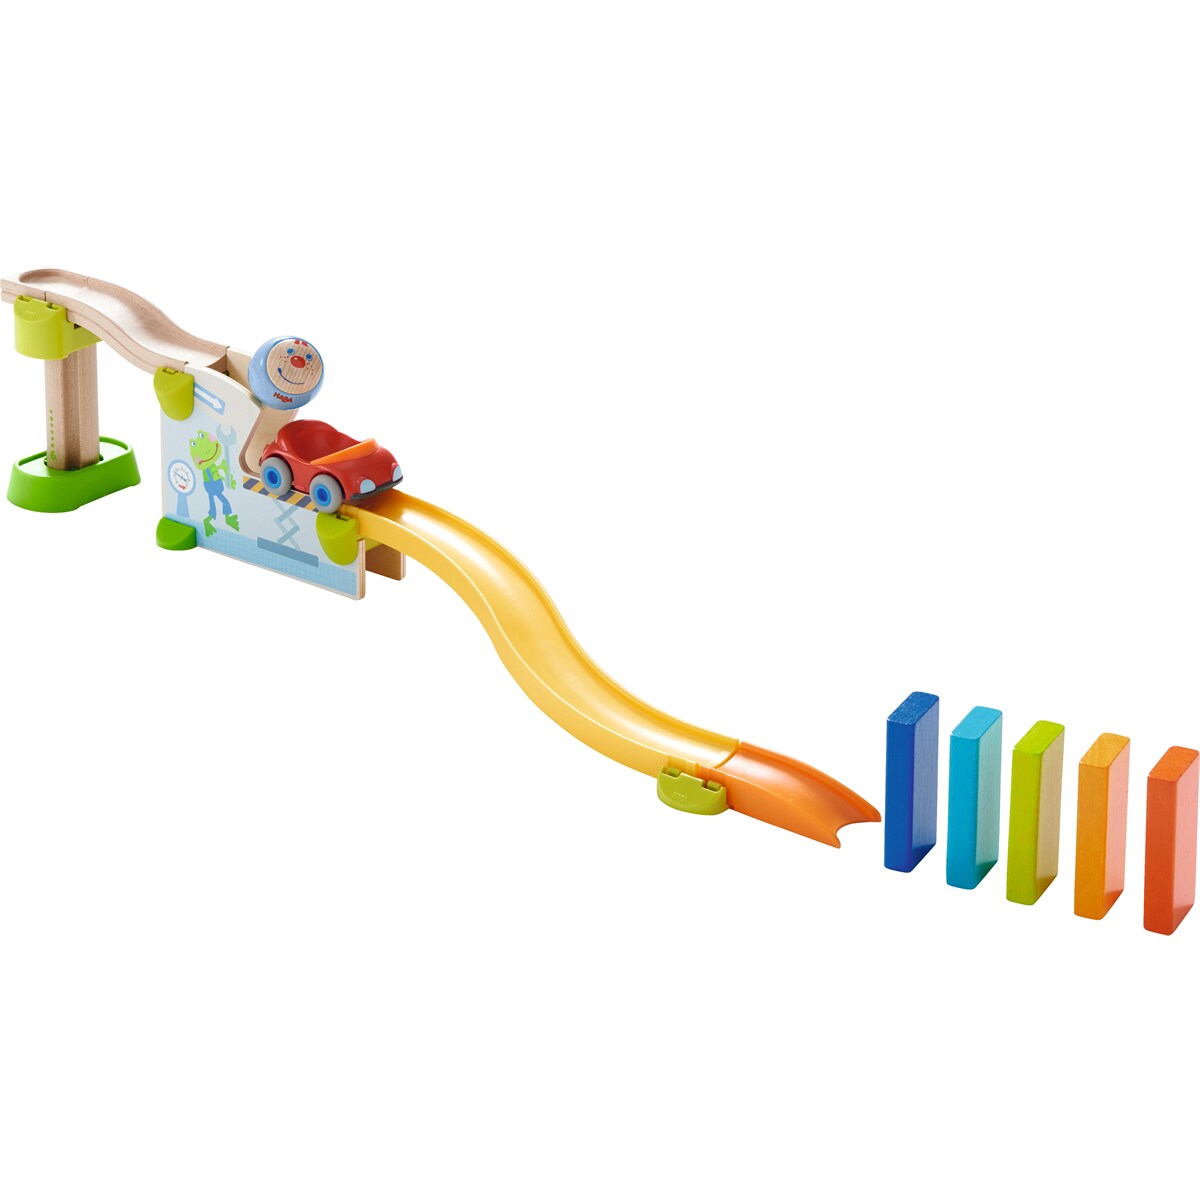 HABA Kullerbu Theme Set - Jump into Car Dominos - 15 Piece Playset - Use as a Standalone Set or an Expansion